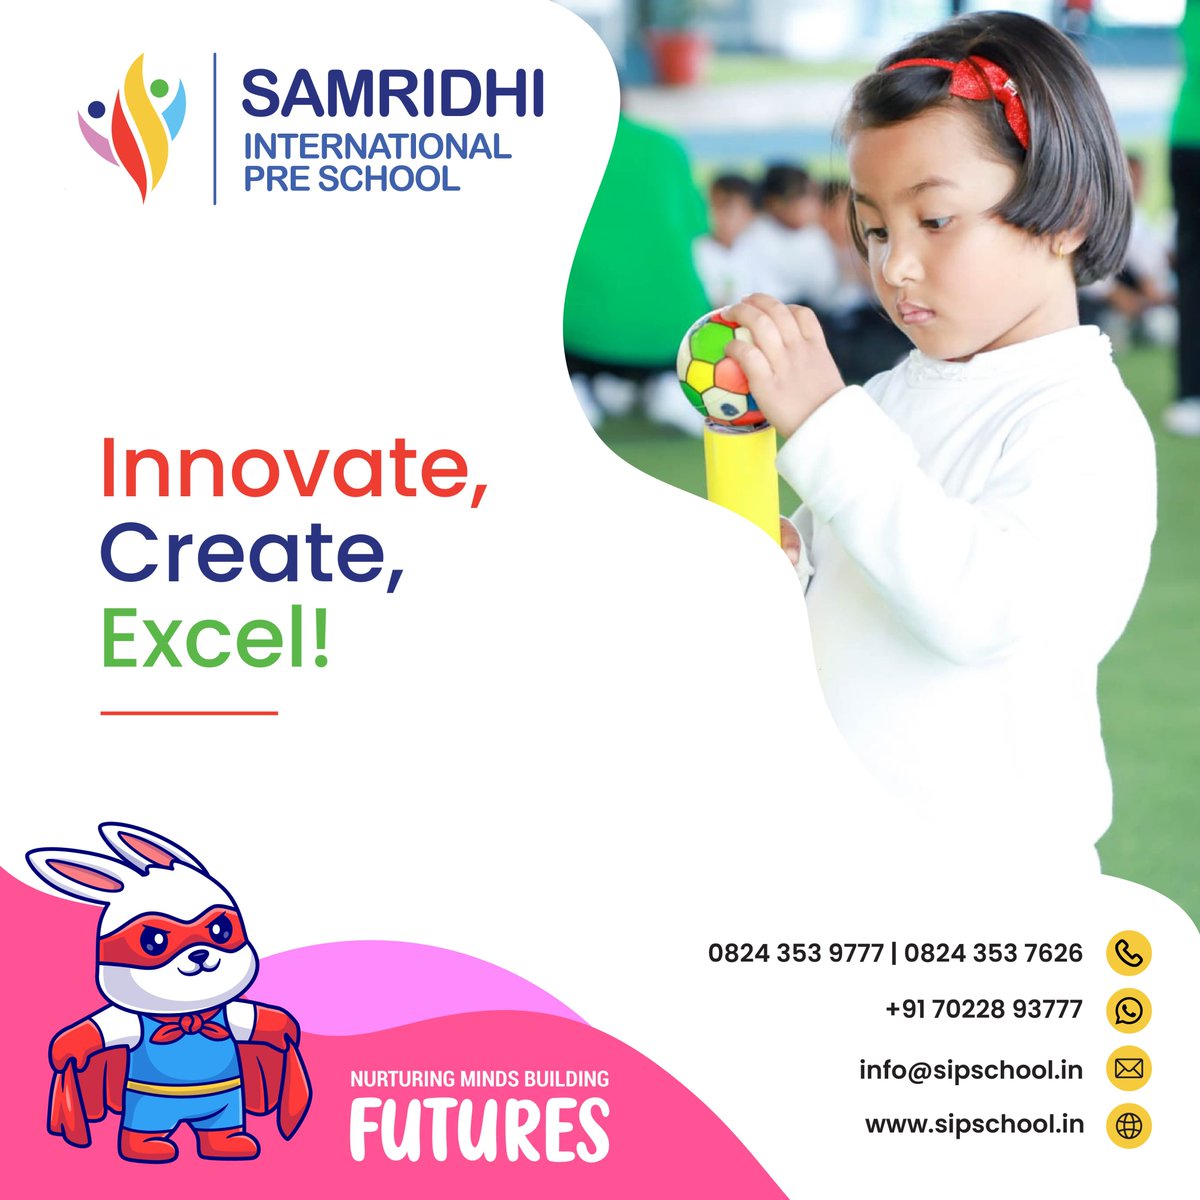 At Samridhi International Pre School, innovation is encouraged, creativity is celebrated, and excellence is achieved!  Join us in shaping a brighter future!  #CuriosityToCreativity #ShineBright #NurturingYoungMinds #PassionForProgress #InnovativeEducation #SamridhiSuccess